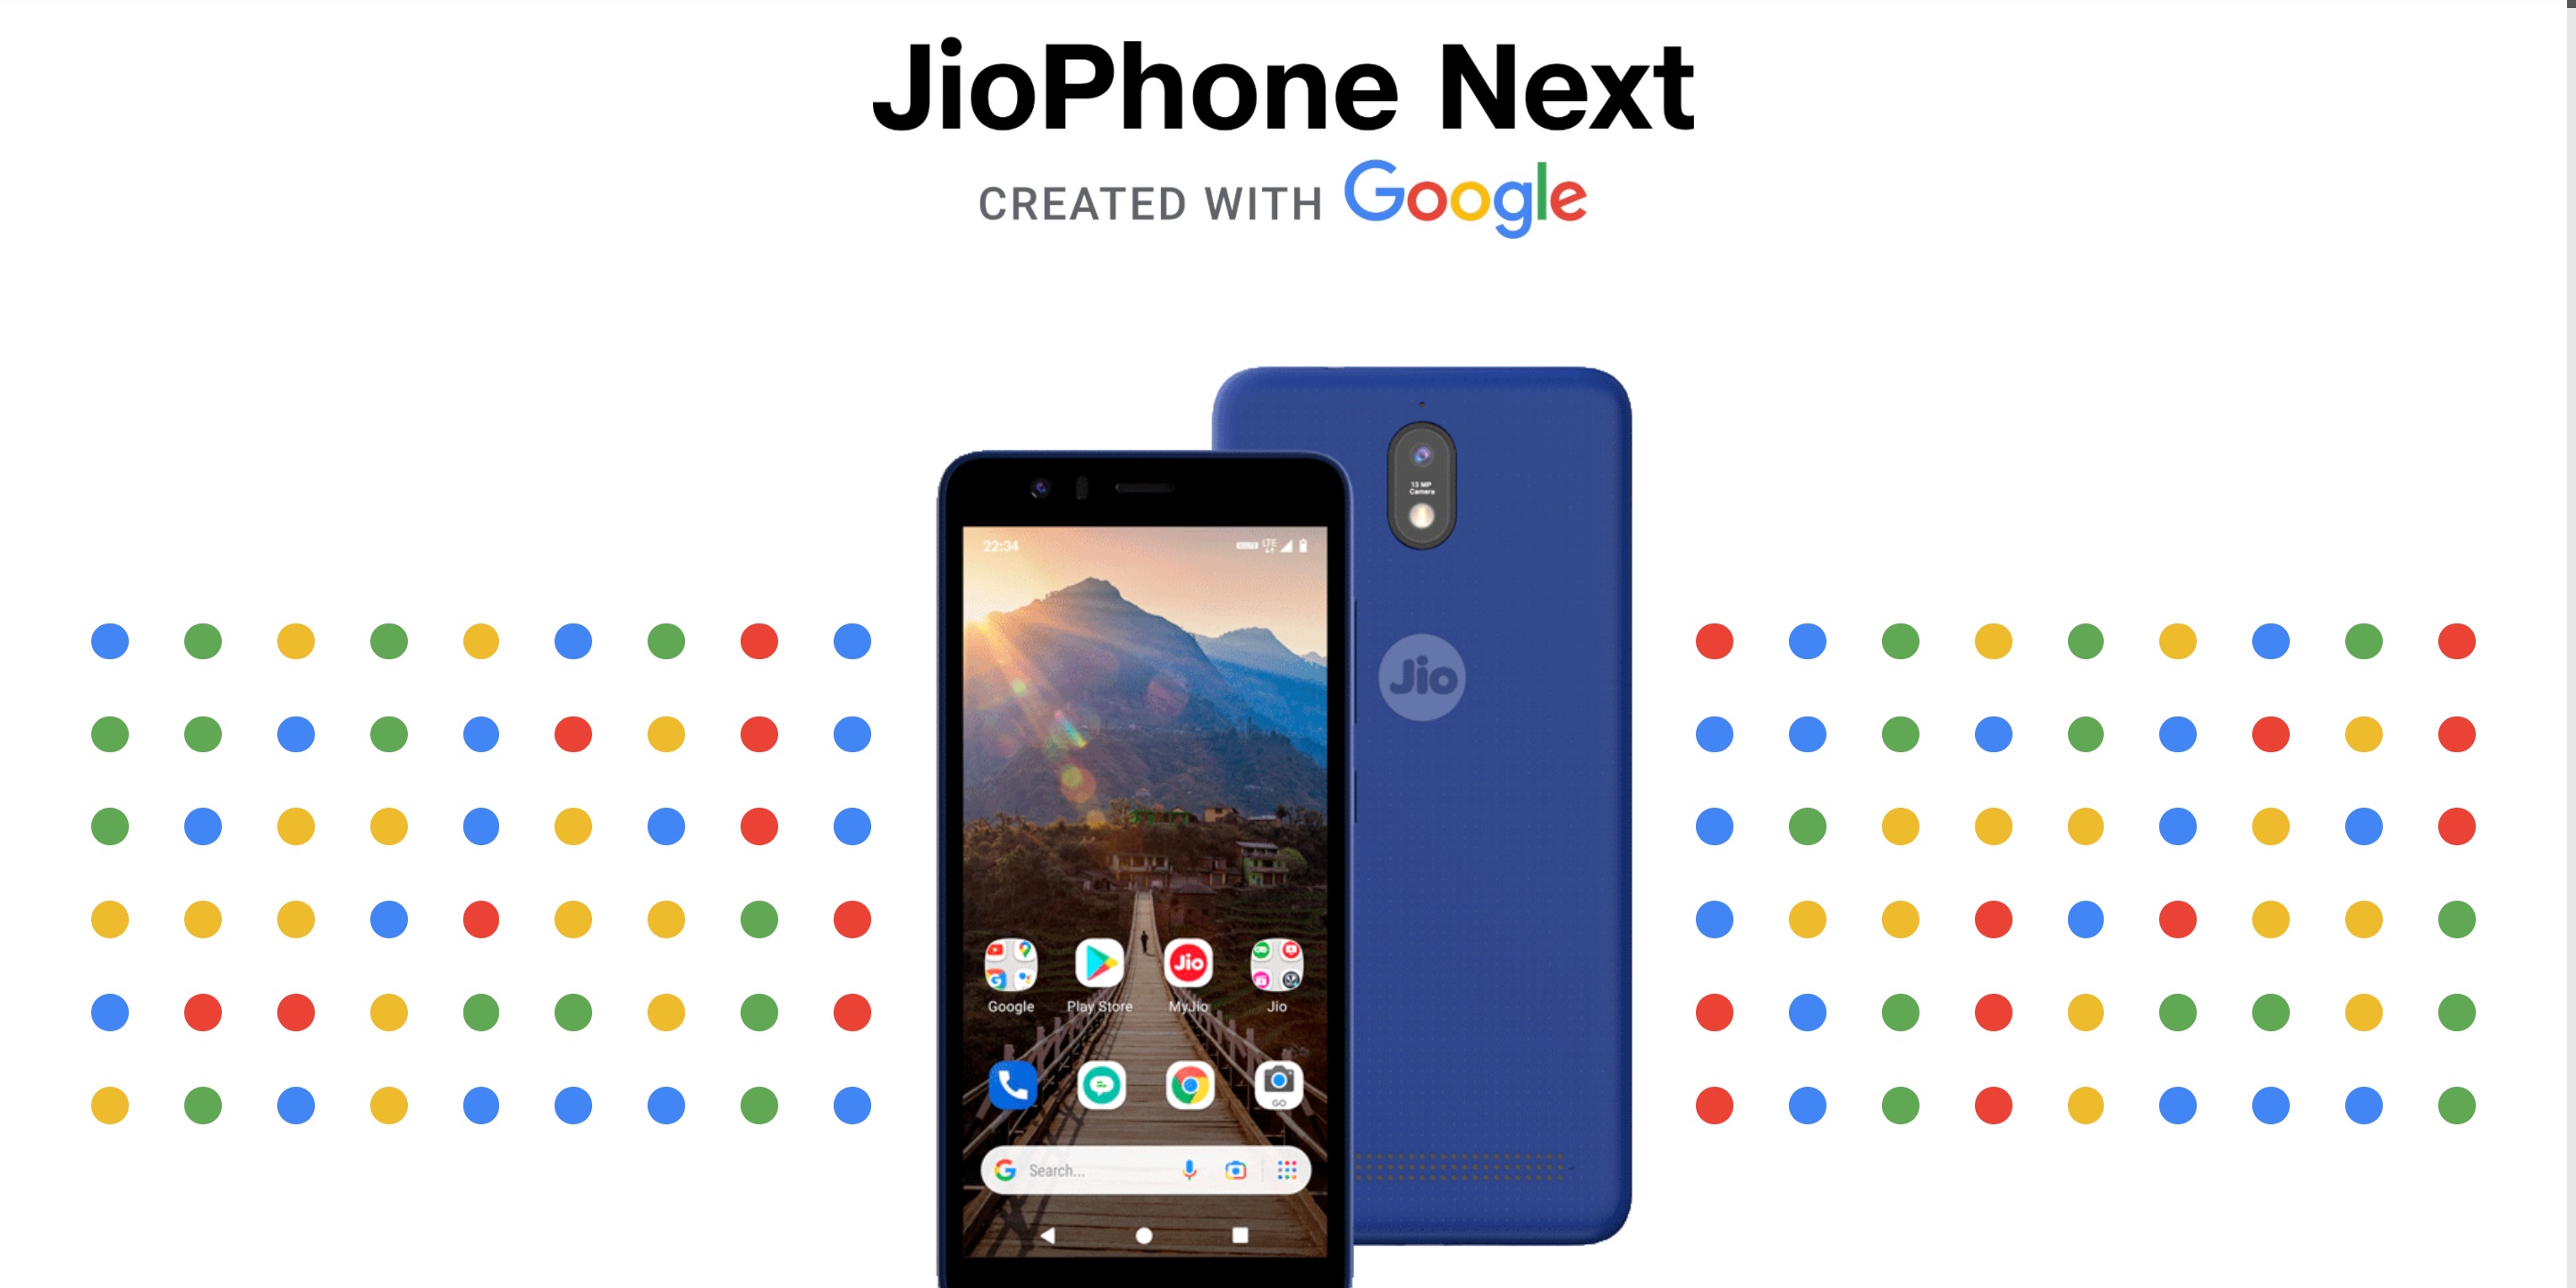 Finally, the price of "the world's cheapest 4G smartphone" JioPhone Next, developed in collaboration with Google, has been named